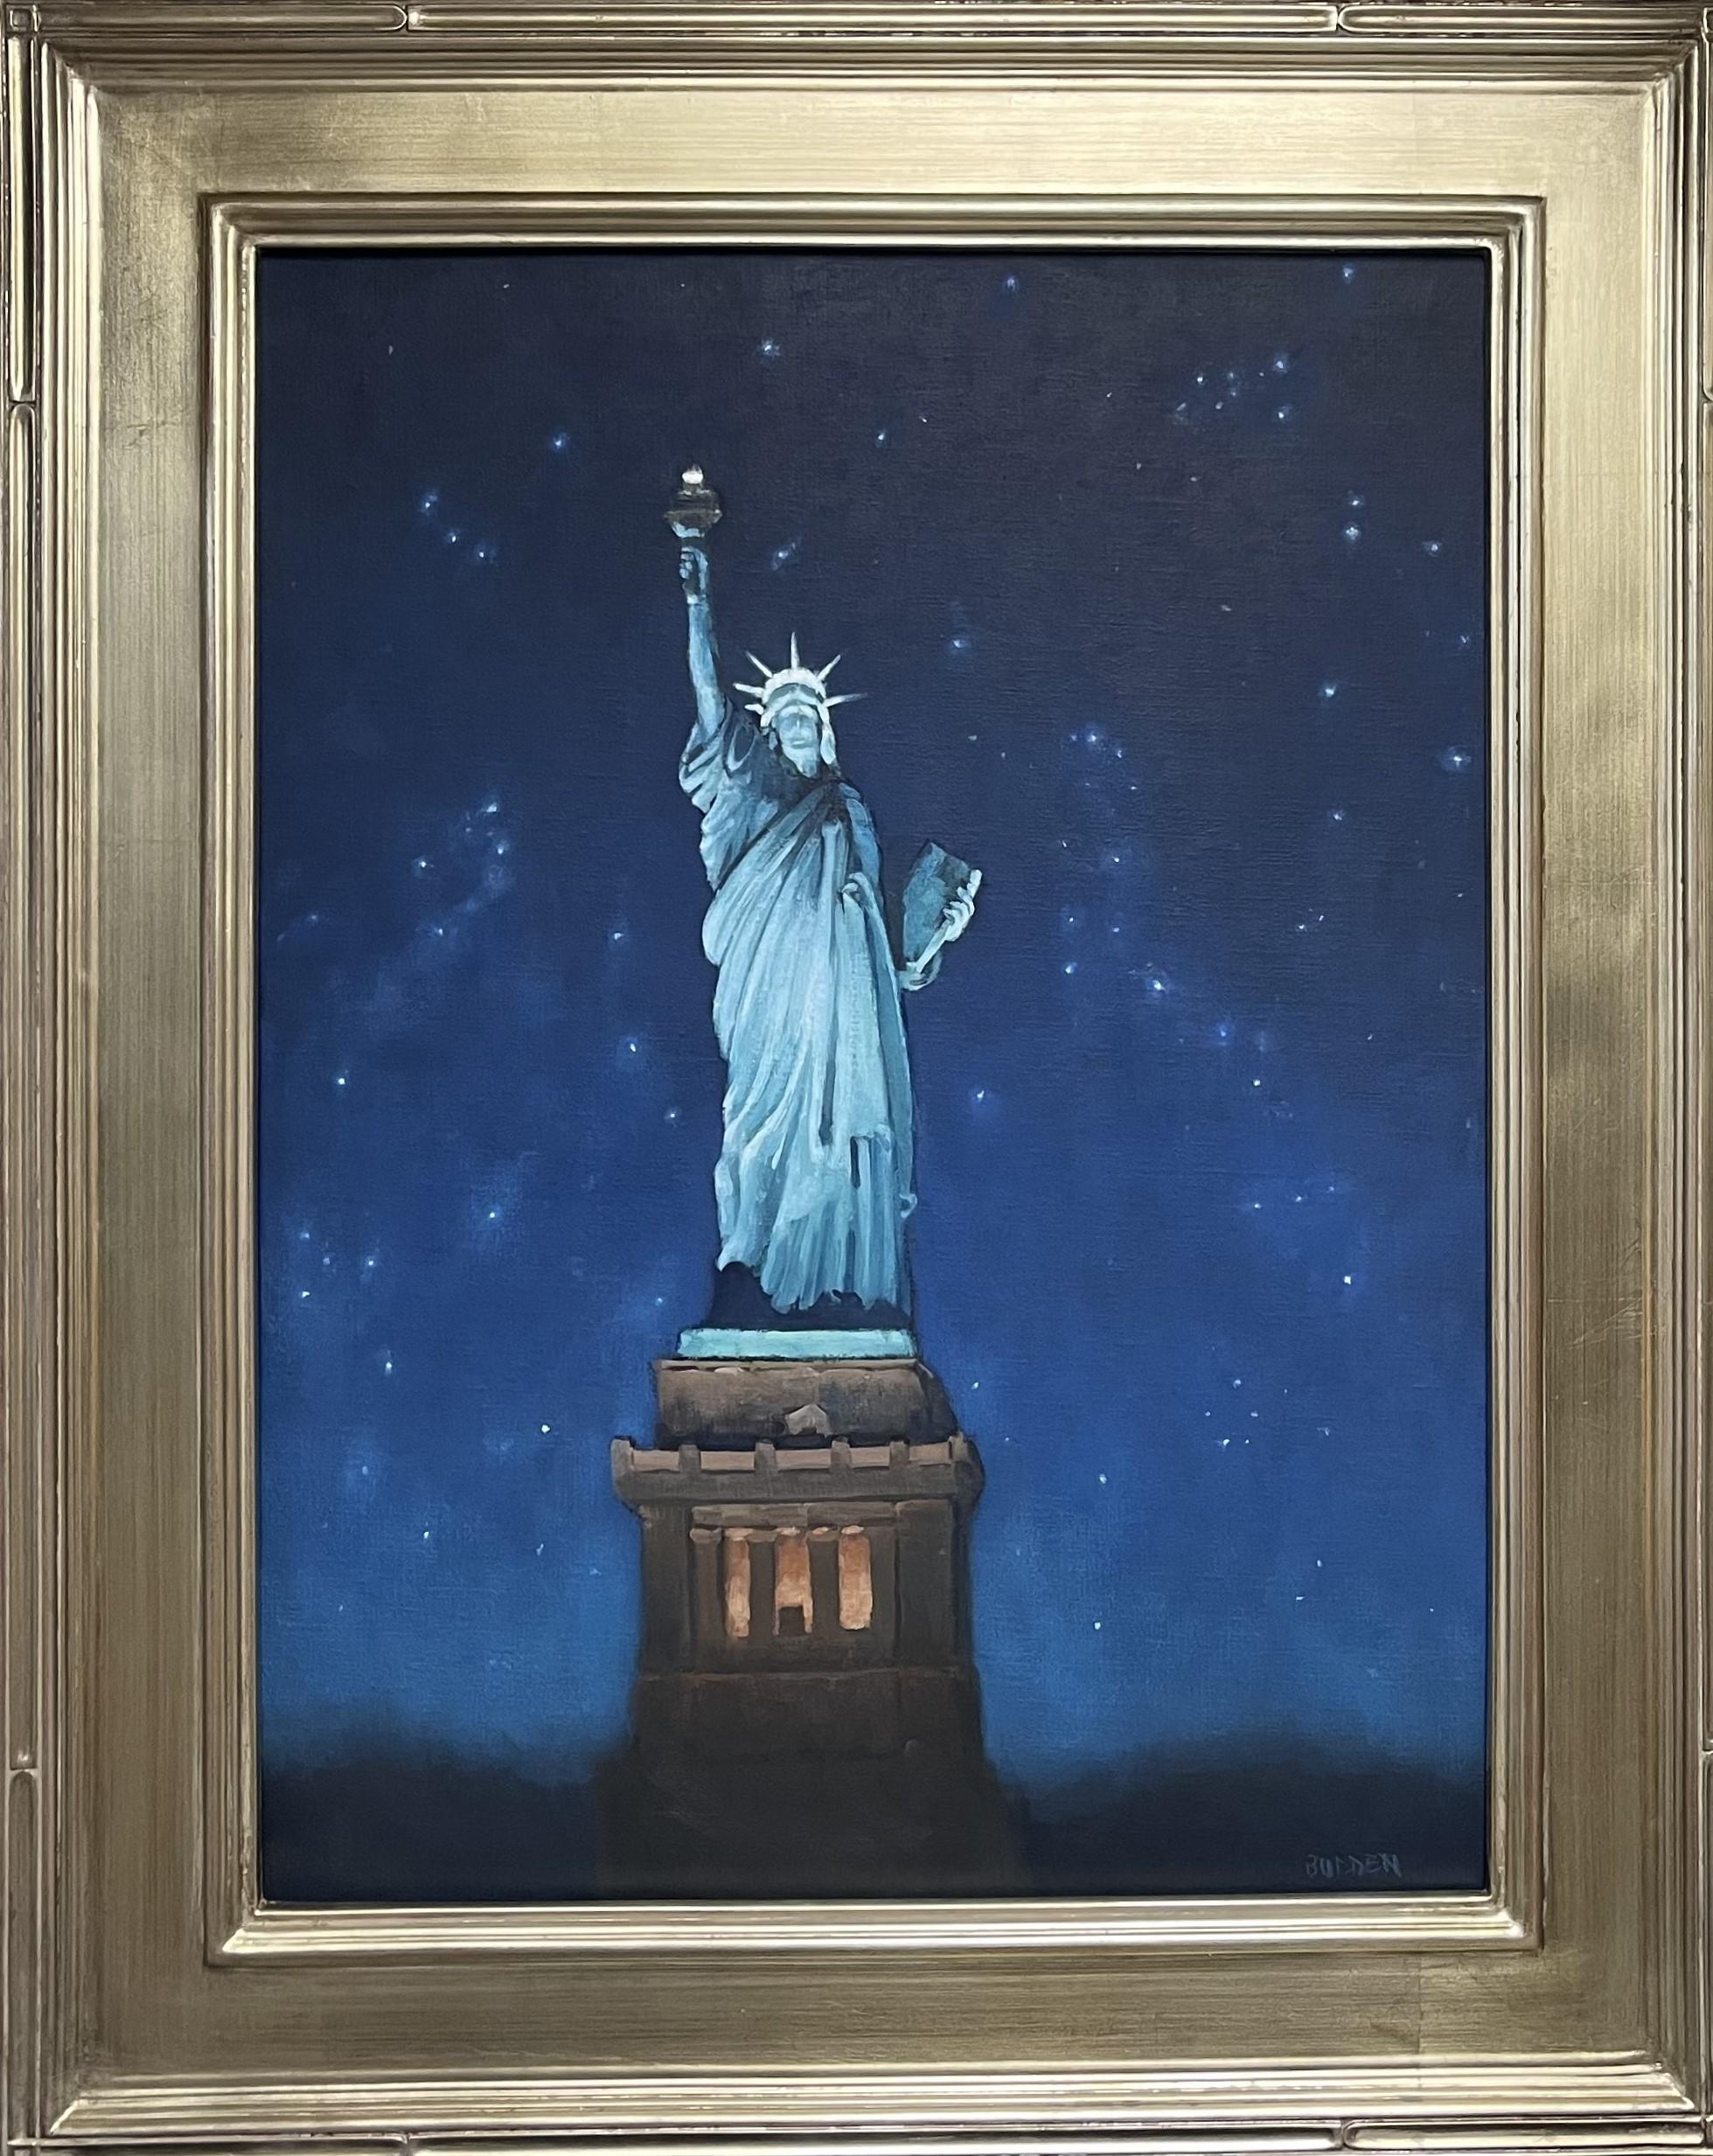 Night of Stars, Statue of Liberty
oil/canvas 24 x 18 image
Night of Stars is an oil painting on canvas by award winning contemporary artist Michael Budden that showcases a beautifully, clear nocturne full of stars and of course the main star is the